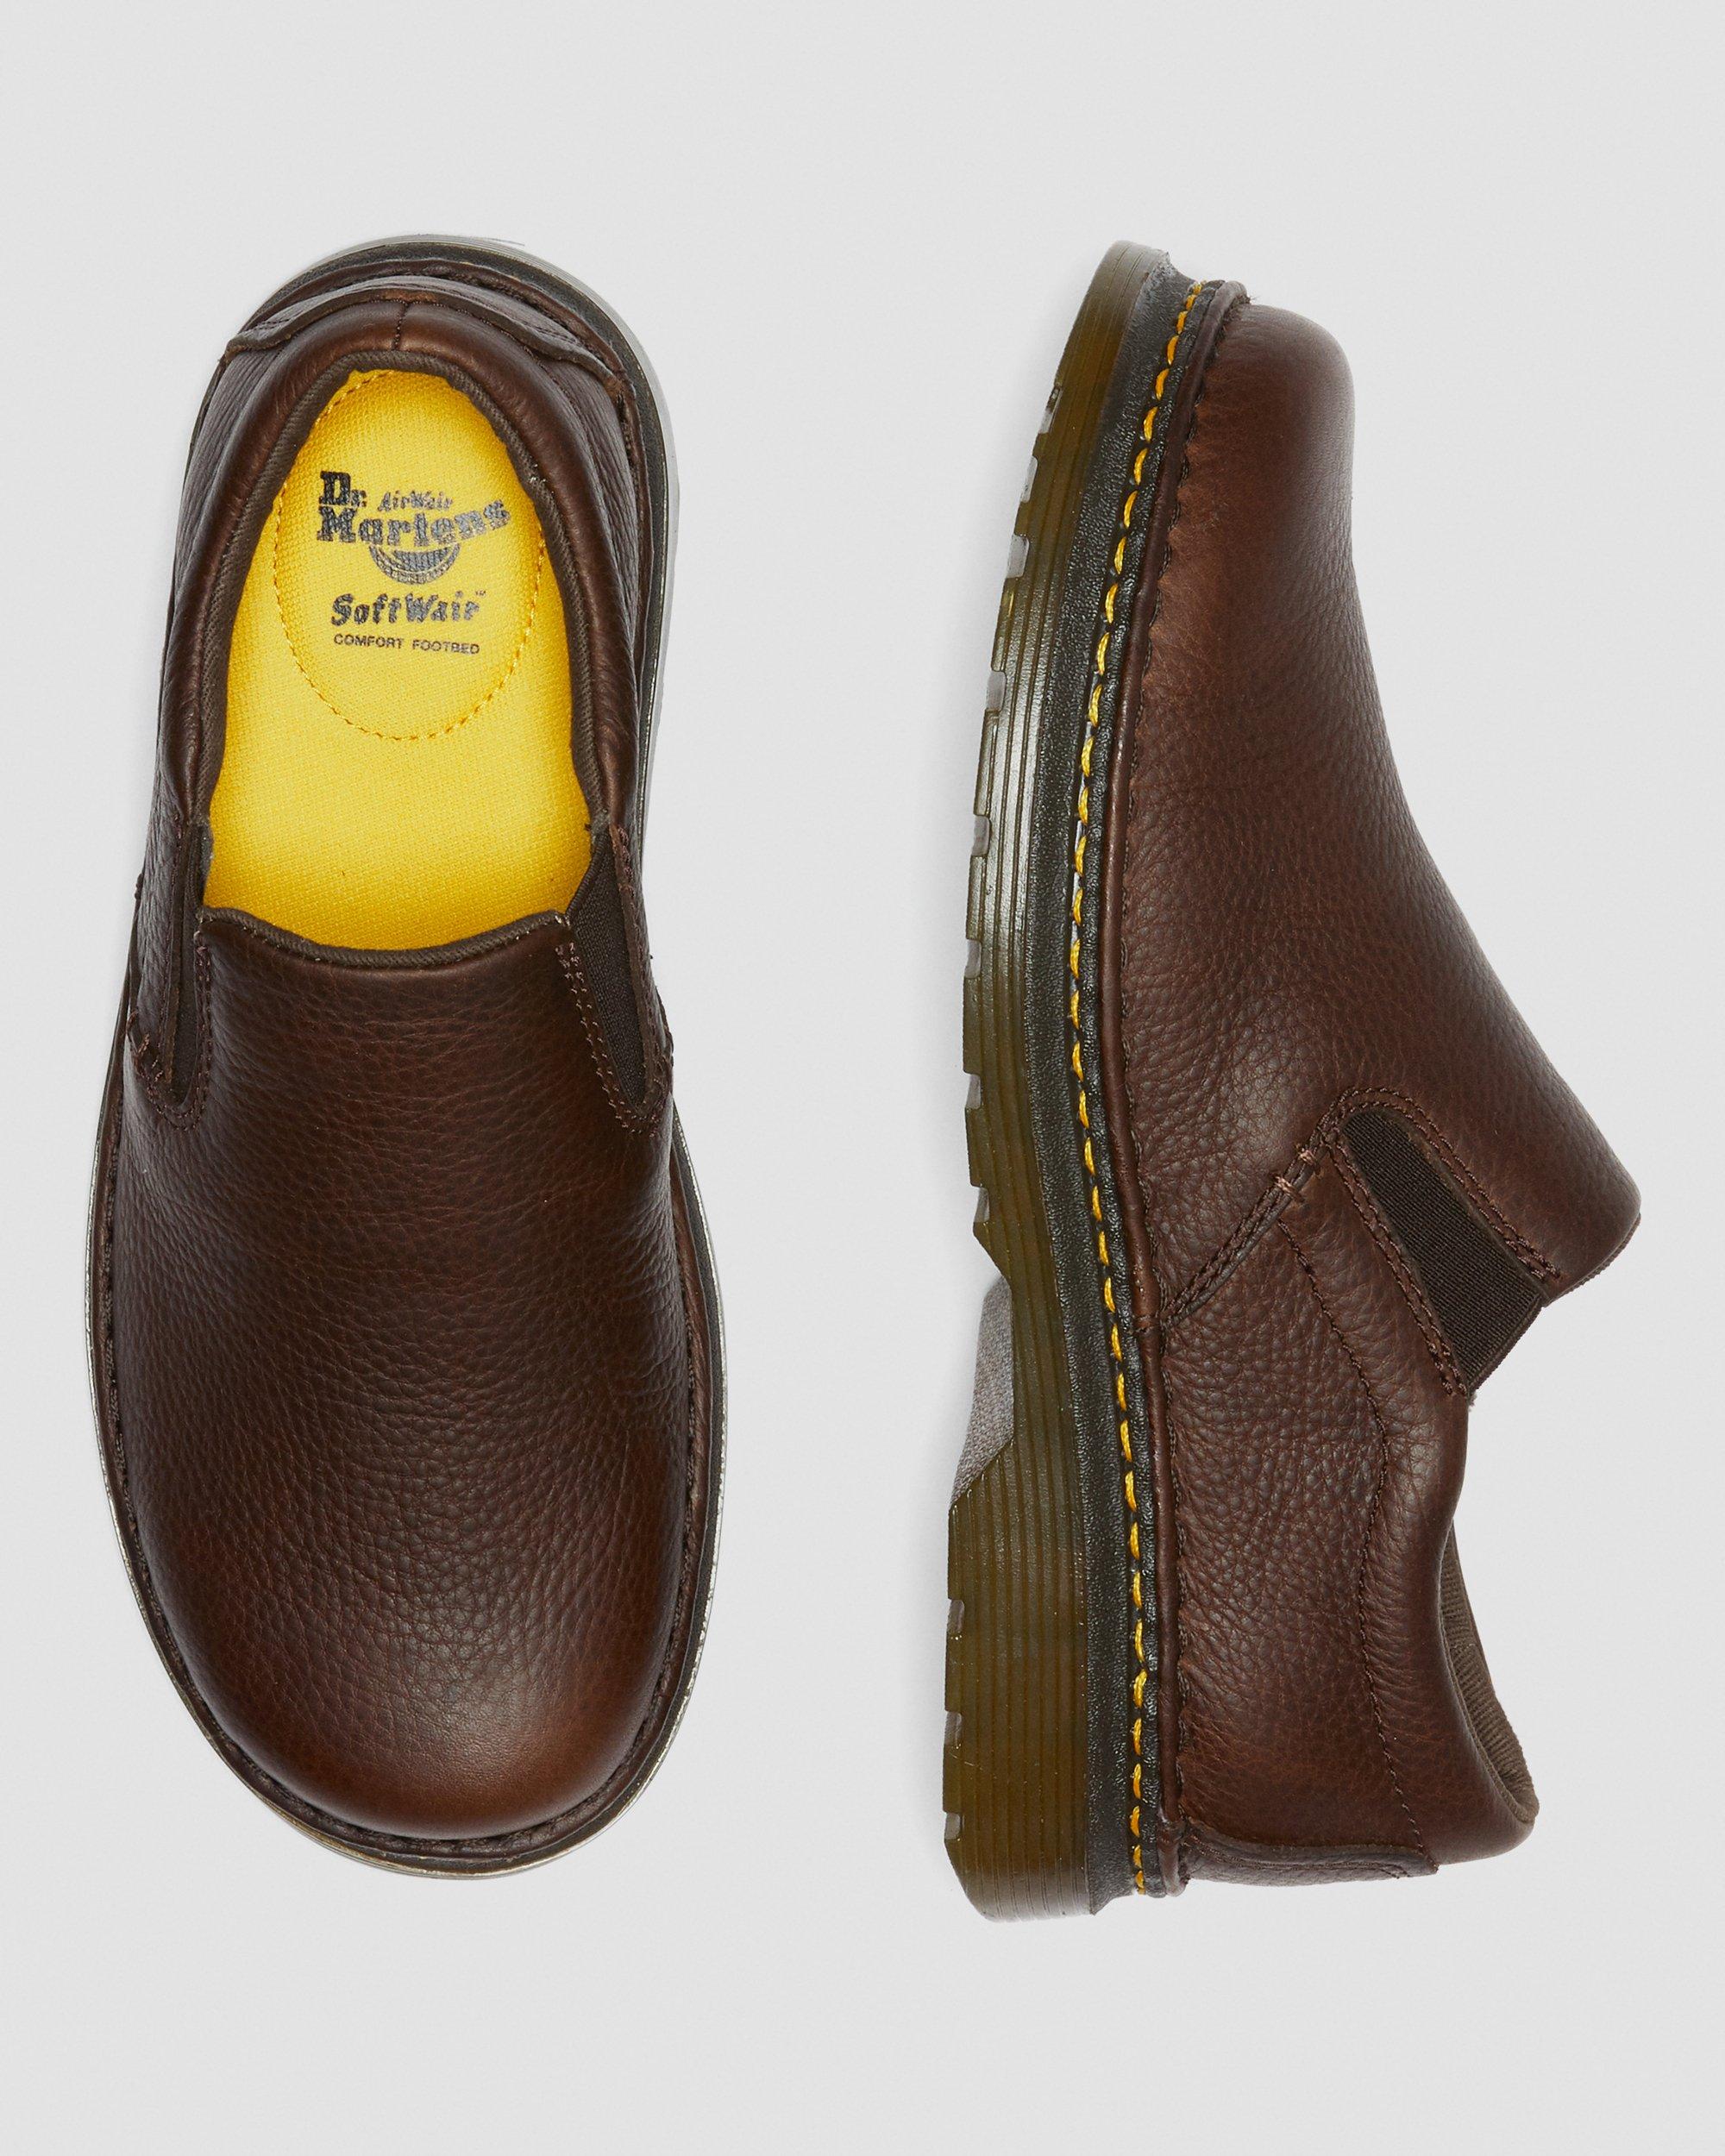 Boyle Men's Grizzly Leather Slip On Shoes Dr. Martens